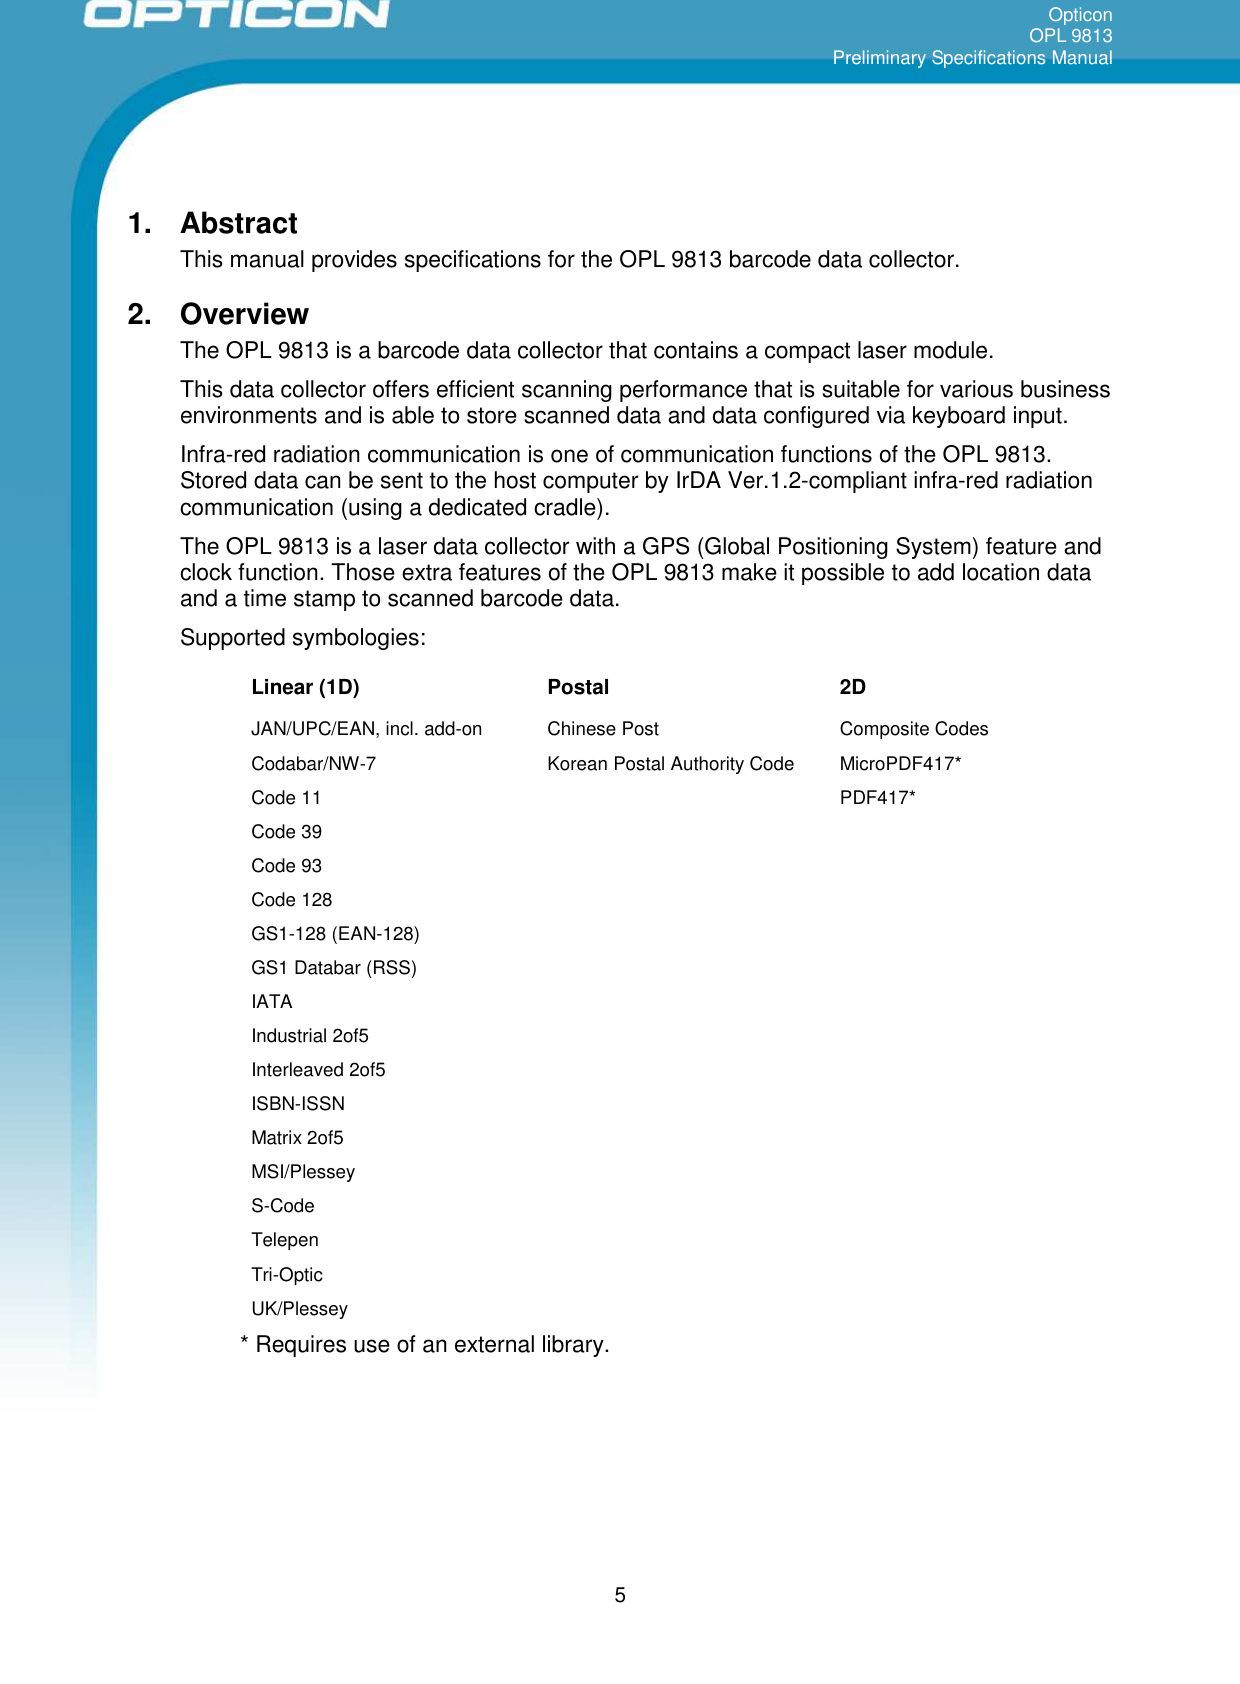 OpticonOPL 9813Preliminary Specifications Manual51. AbstractThis manual provides specifications for the OPL 9813 barcode data collector.2. OverviewThe OPL 9813 is a barcode data collector that contains a compact laser module.This data collector offers efficient scanning performance that is suitable for various businessenvironments and is able to store scanned data and data configured via keyboard input.Infra-red radiation communication is one of communication functions of the OPL 9813.Stored data can be sent to the host computer by IrDA Ver.1.2-compliant infra-red radiationcommunication (using a dedicated cradle).The OPL 9813 is a laser data collector with a GPS (Global Positioning System) feature andclock function. Those extra features of the OPL 9813 make it possible to add location dataand a time stamp to scanned barcode data.Supported symbologies:Linear (1D) Postal 2DJAN/UPC/EAN, incl. add-on Chinese Post Composite CodesCodabar/NW-7 Korean Postal Authority Code MicroPDF417*Code 11 PDF417*Code 39Code 93Code 128GS1-128 (EAN-128)GS1 Databar (RSS)IATAIndustrial 2of5Interleaved 2of5ISBN-ISSNMatrix 2of5MSI/PlesseyS-CodeTelepenTri-OpticUK/Plessey* Requires use of an external library.